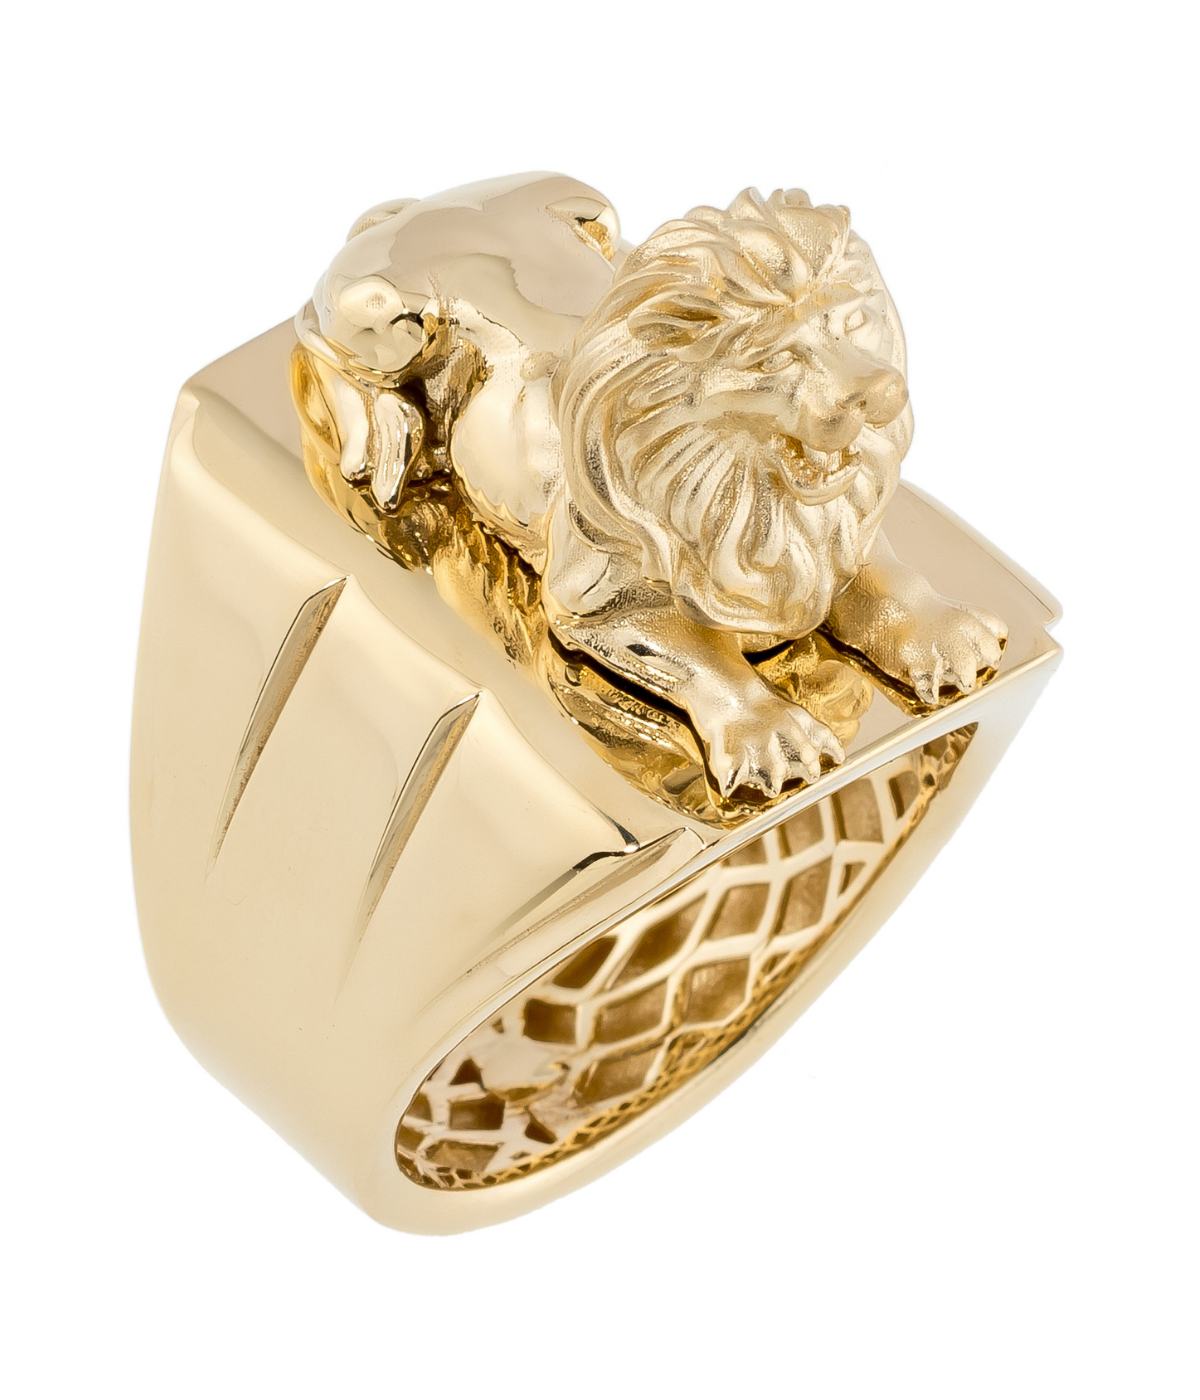 Buy Gold Lion Ring Online In India - Etsy India